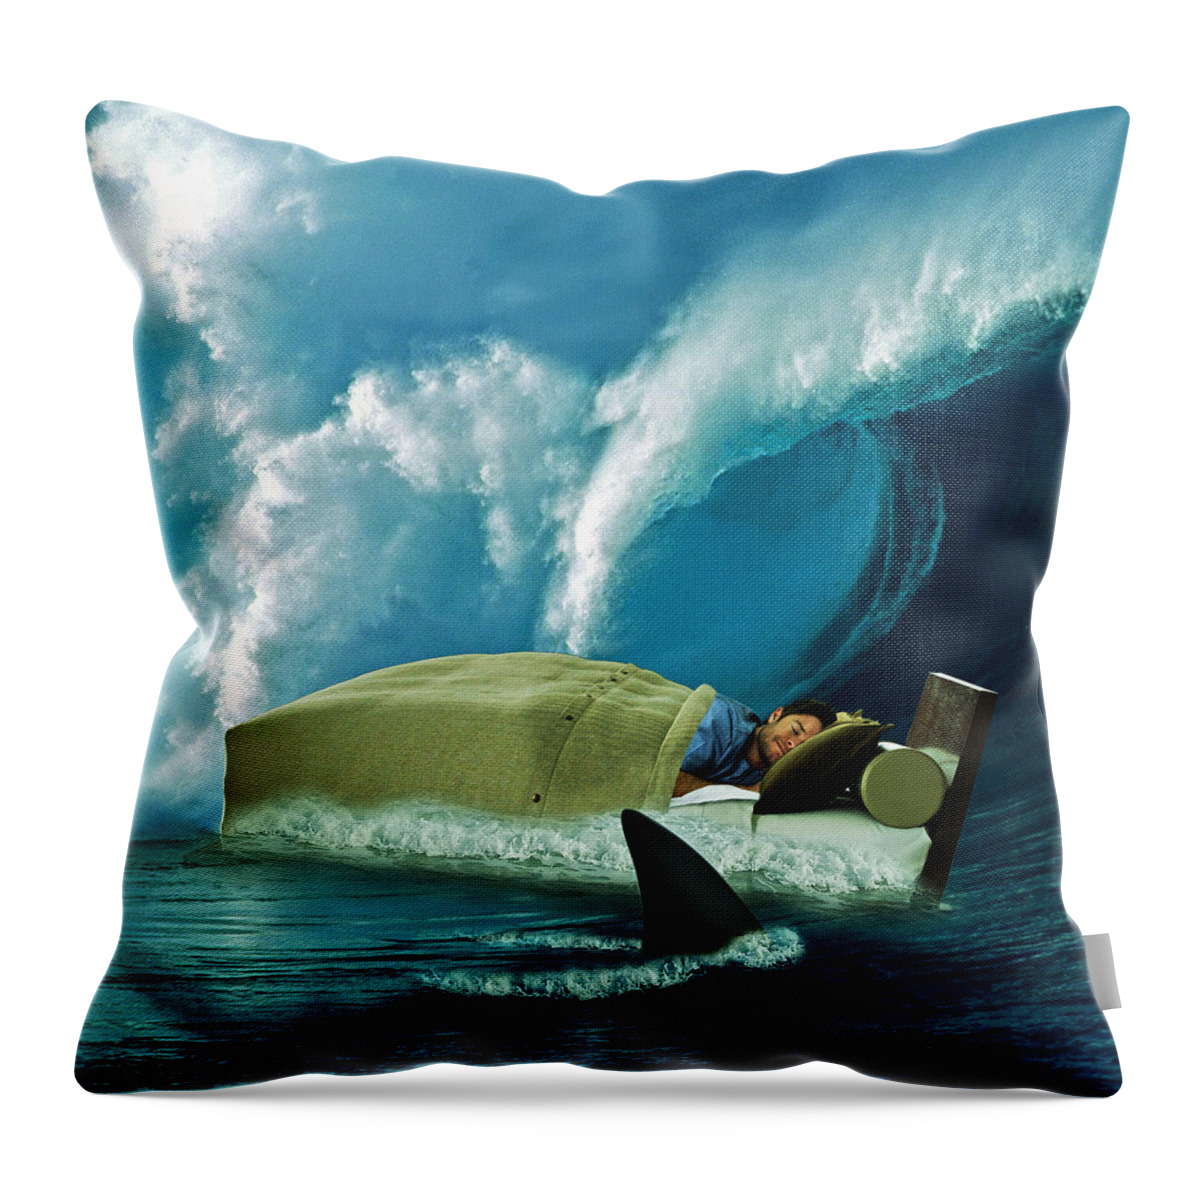 Man Throw Pillow featuring the digital art Sleeping with Sharks by Marian Voicu